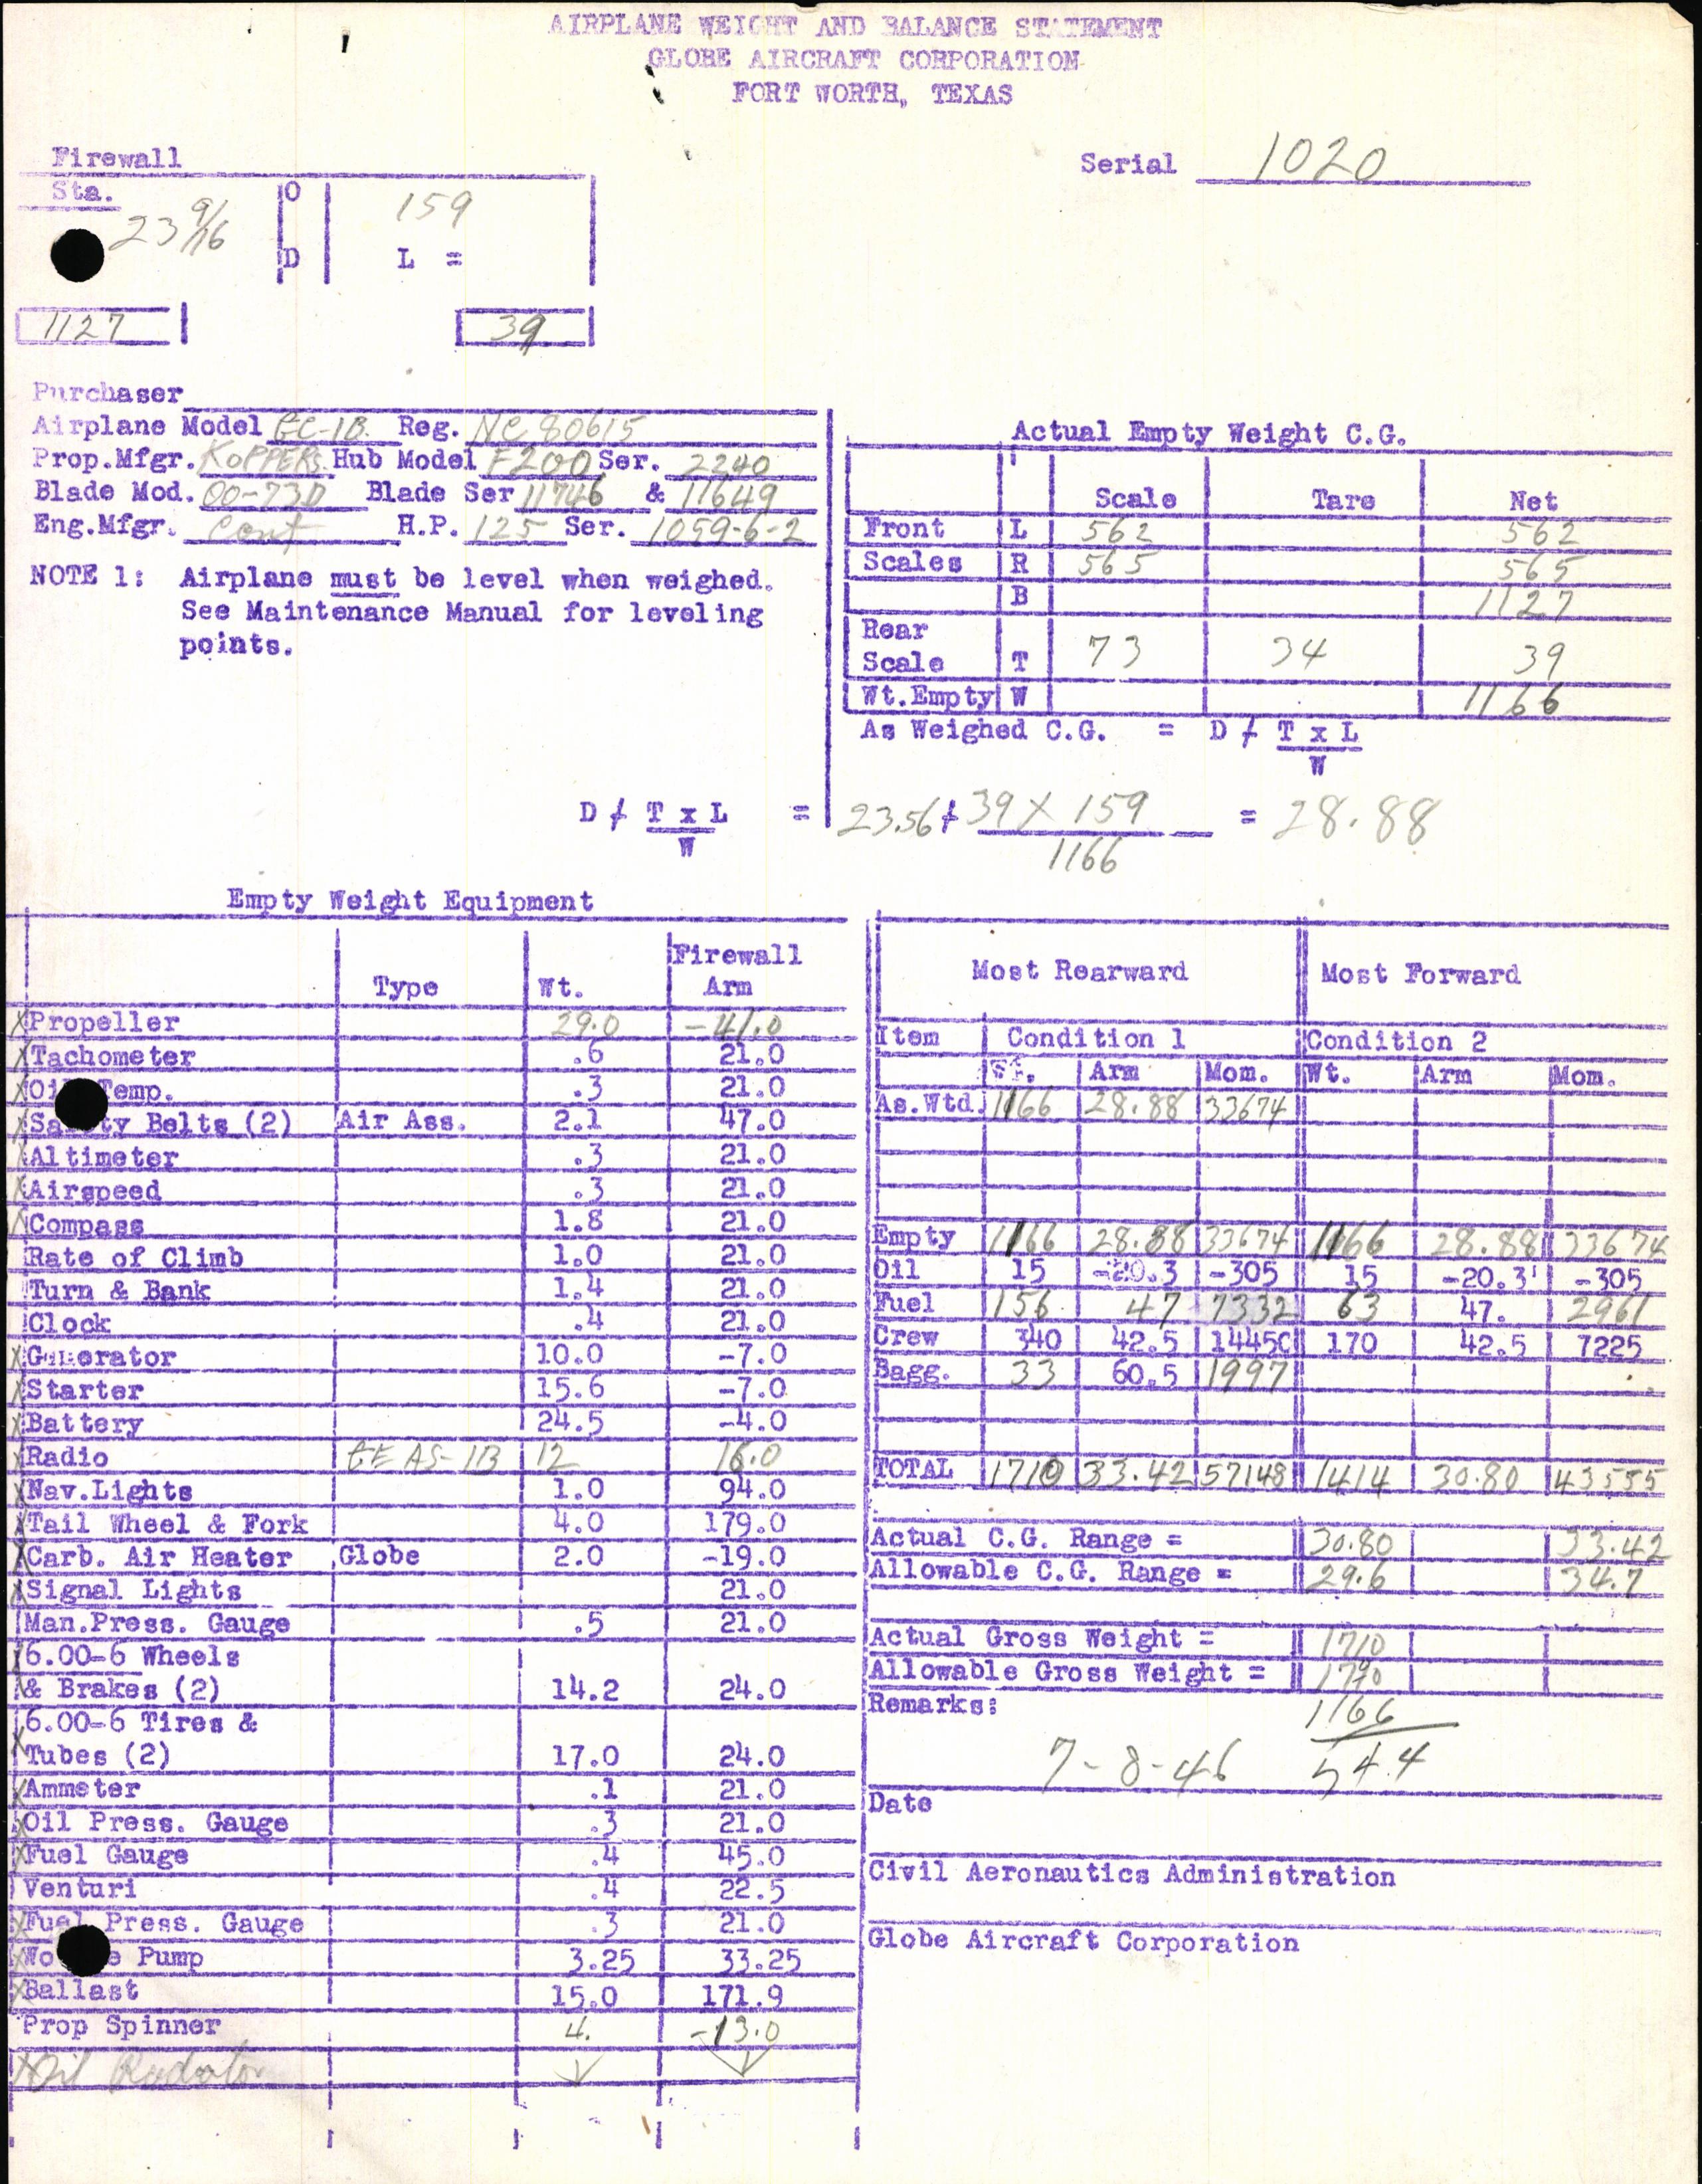 Sample page 7 from AirCorps Library document: Technical Information for Serial Number 1020